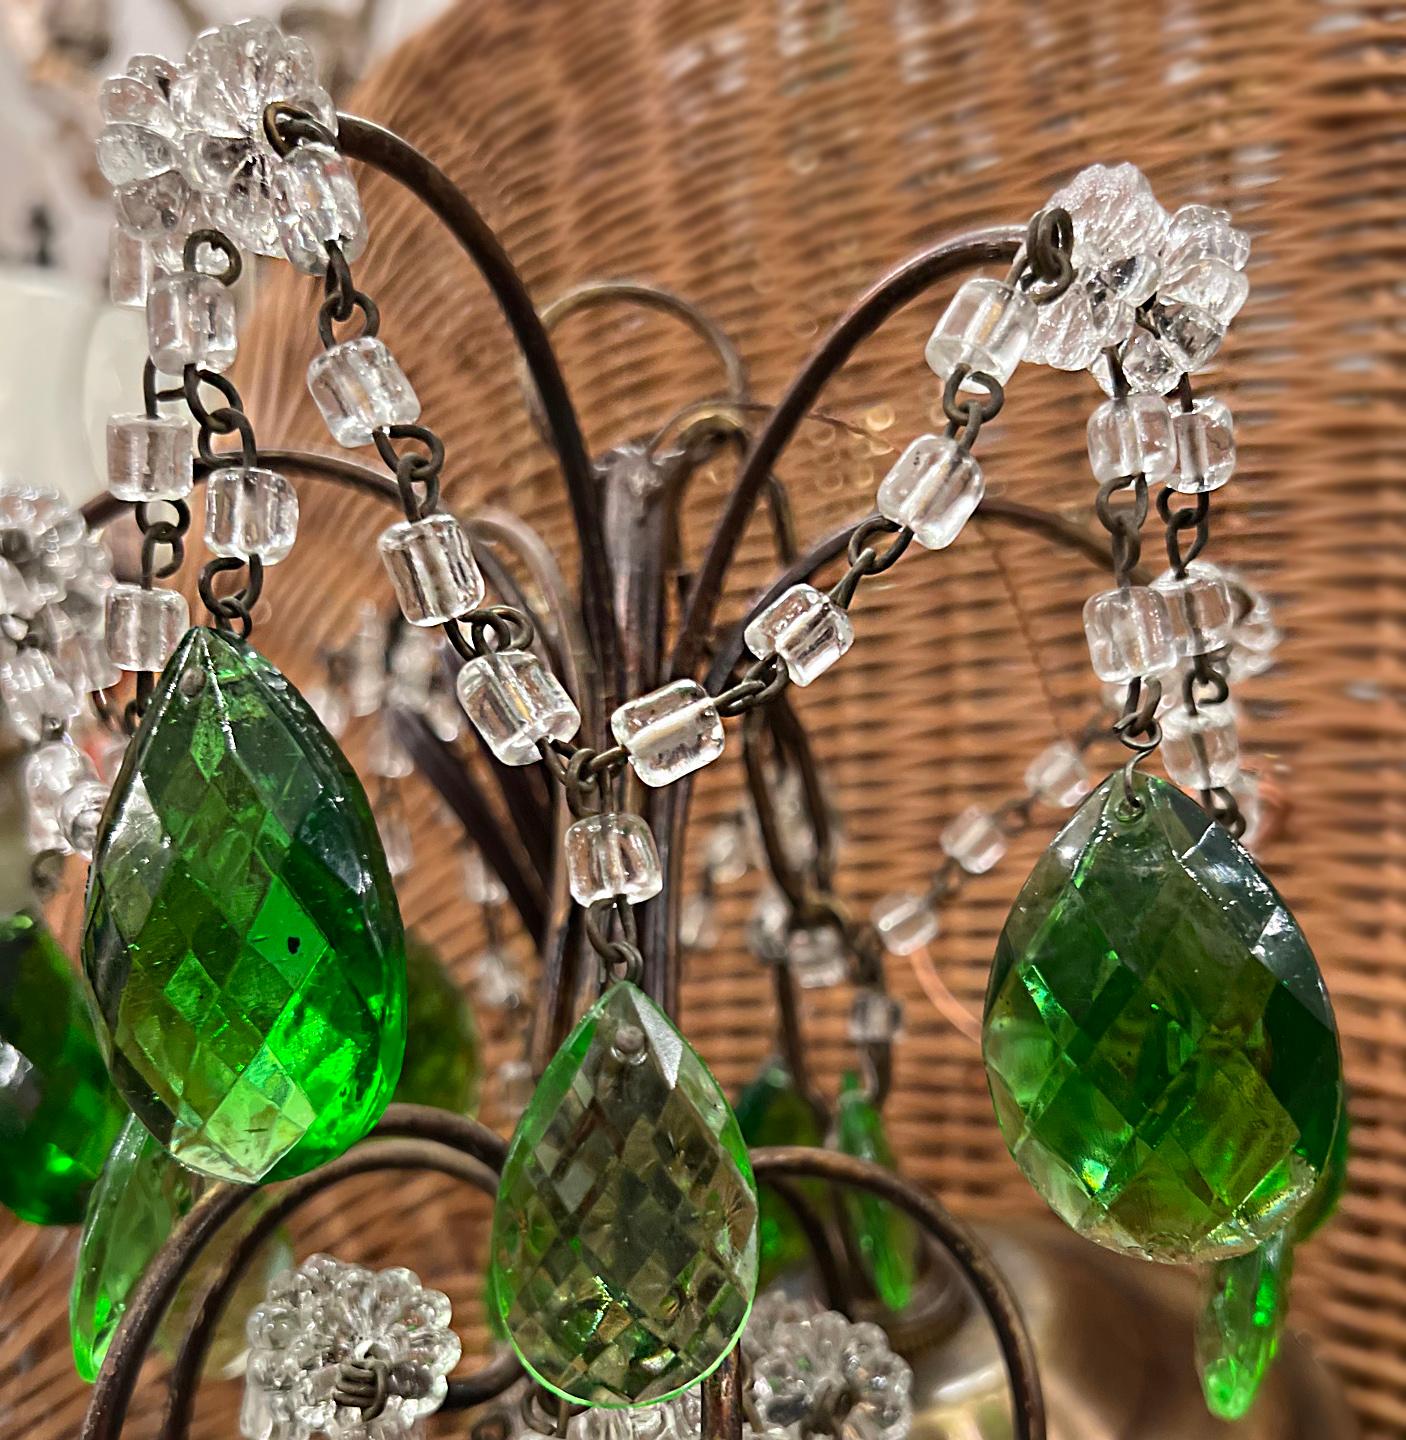 A circa 1950's French crystals chandelier with 3 candelabra lights.

Measurements:
Height: 24